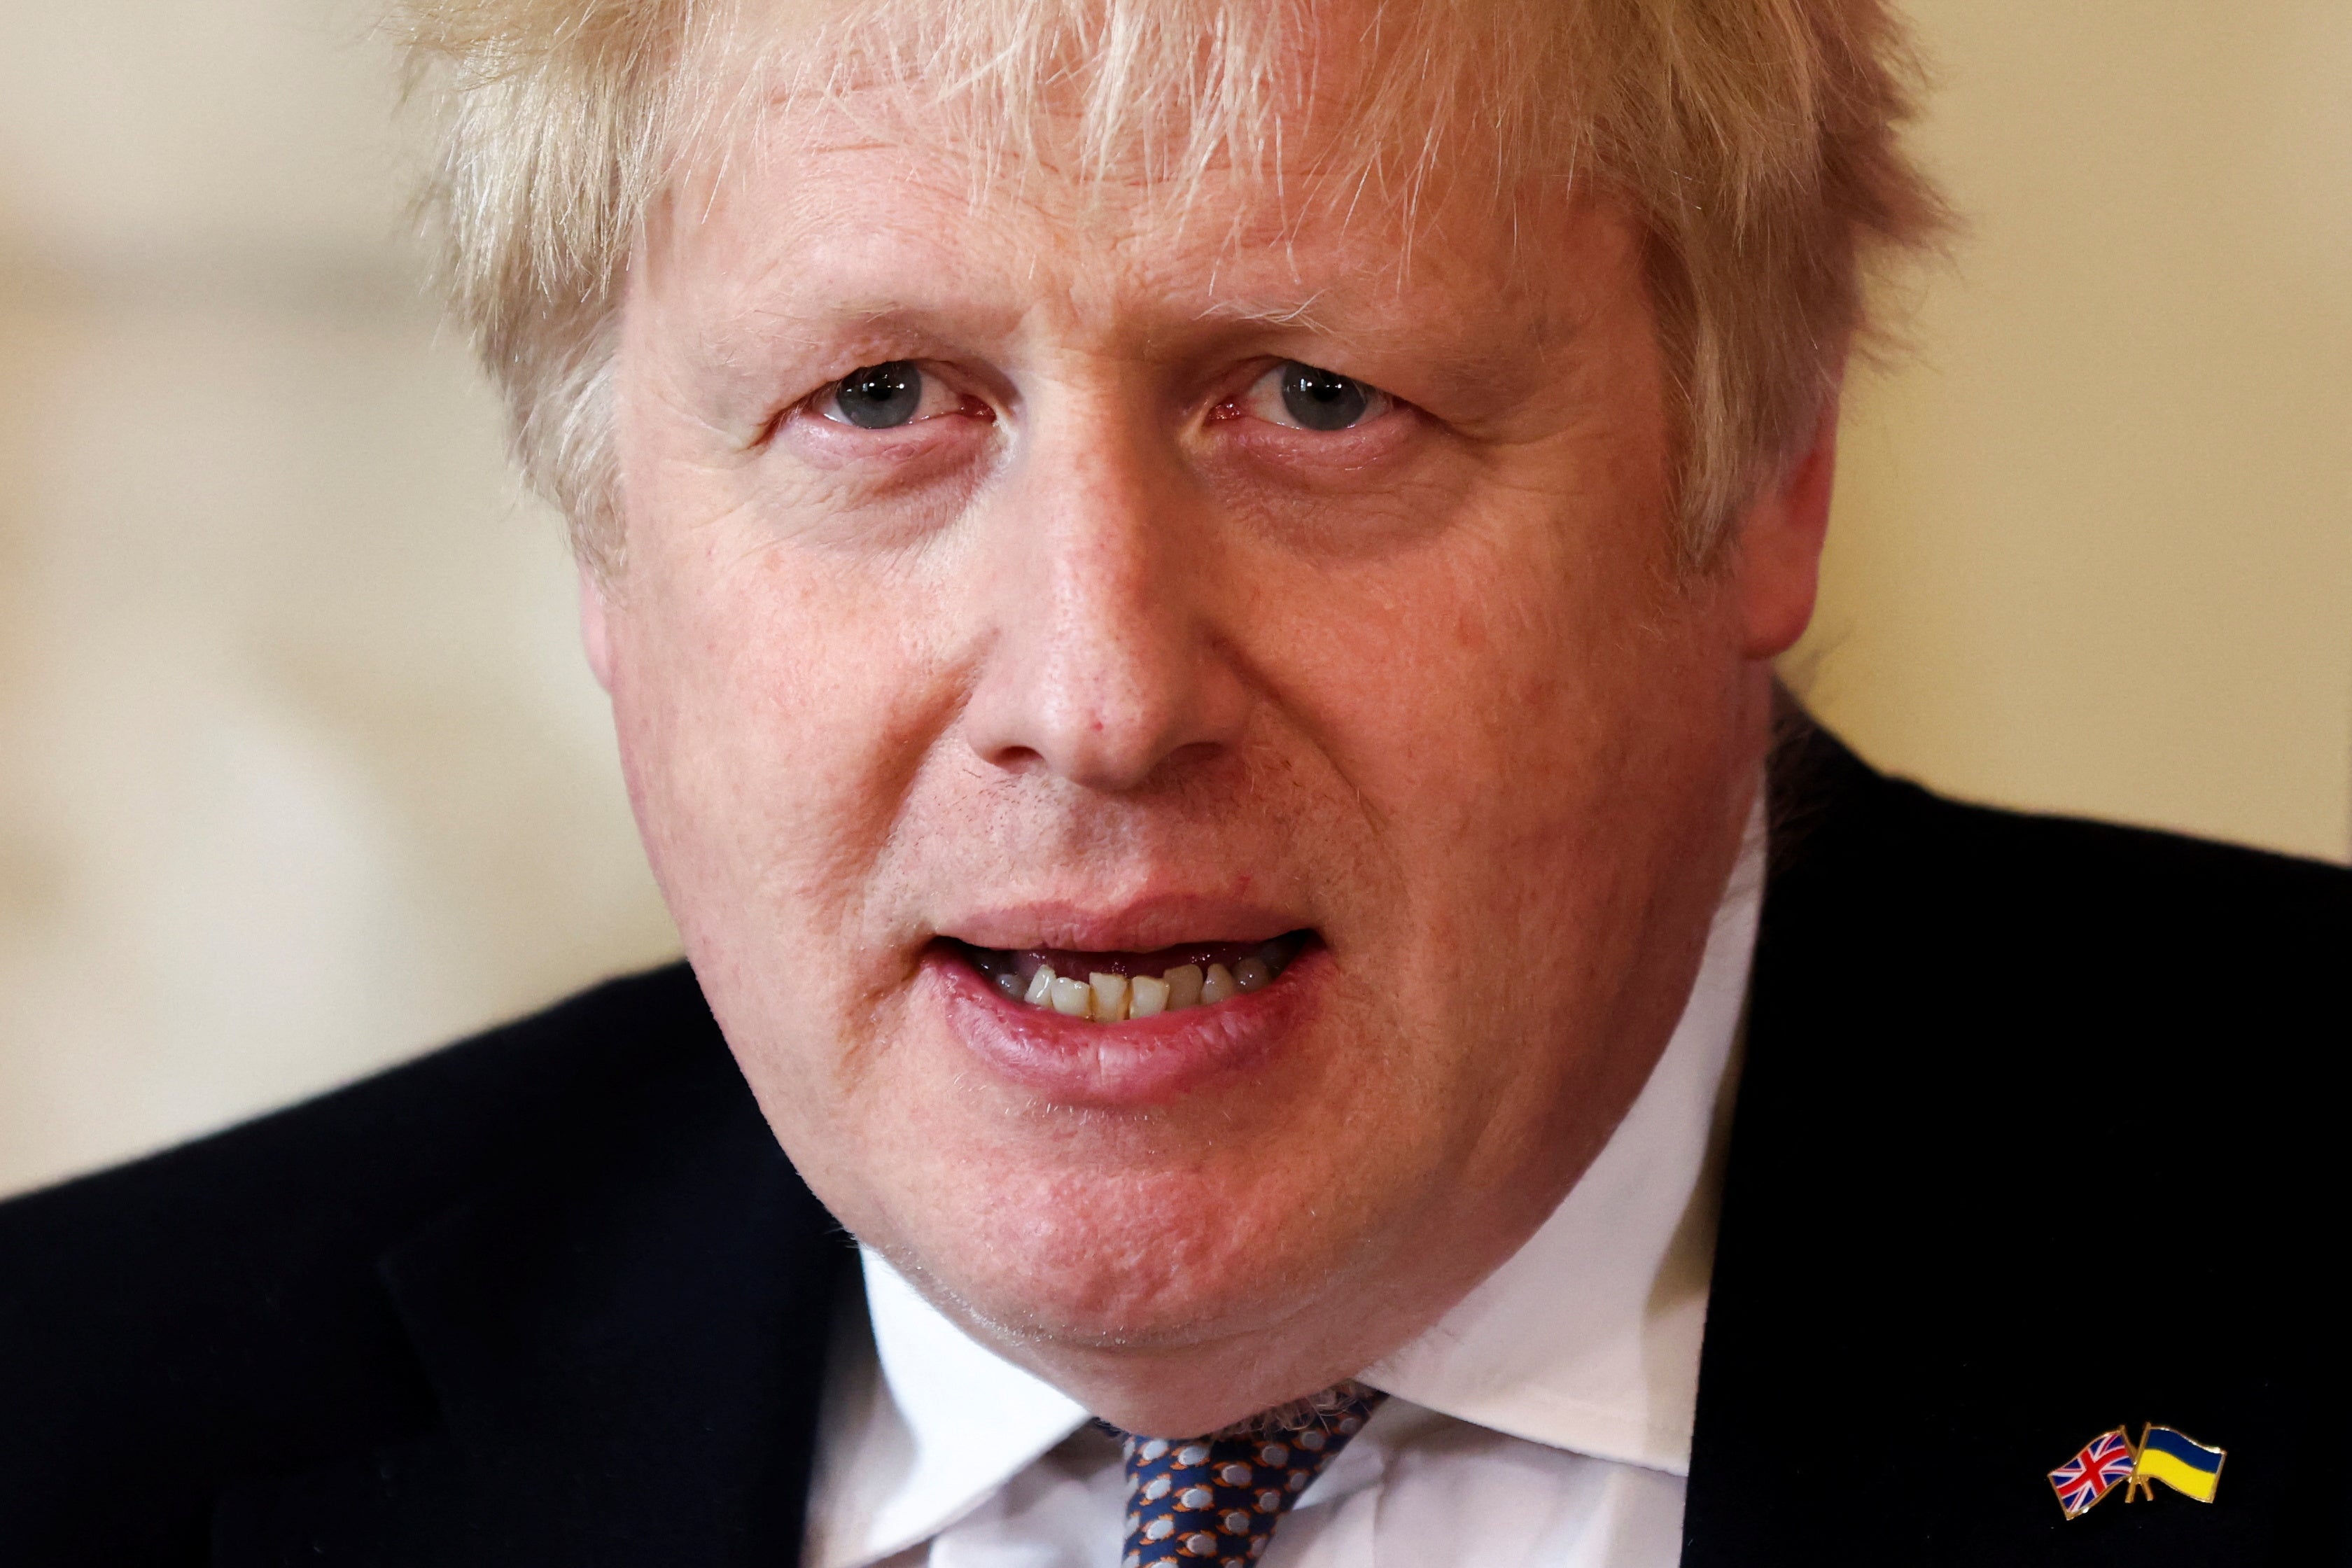 Boris Johnson might have a chance of being prime minister for longer if he could raise his reputation from totally unreliable to slightly slippery